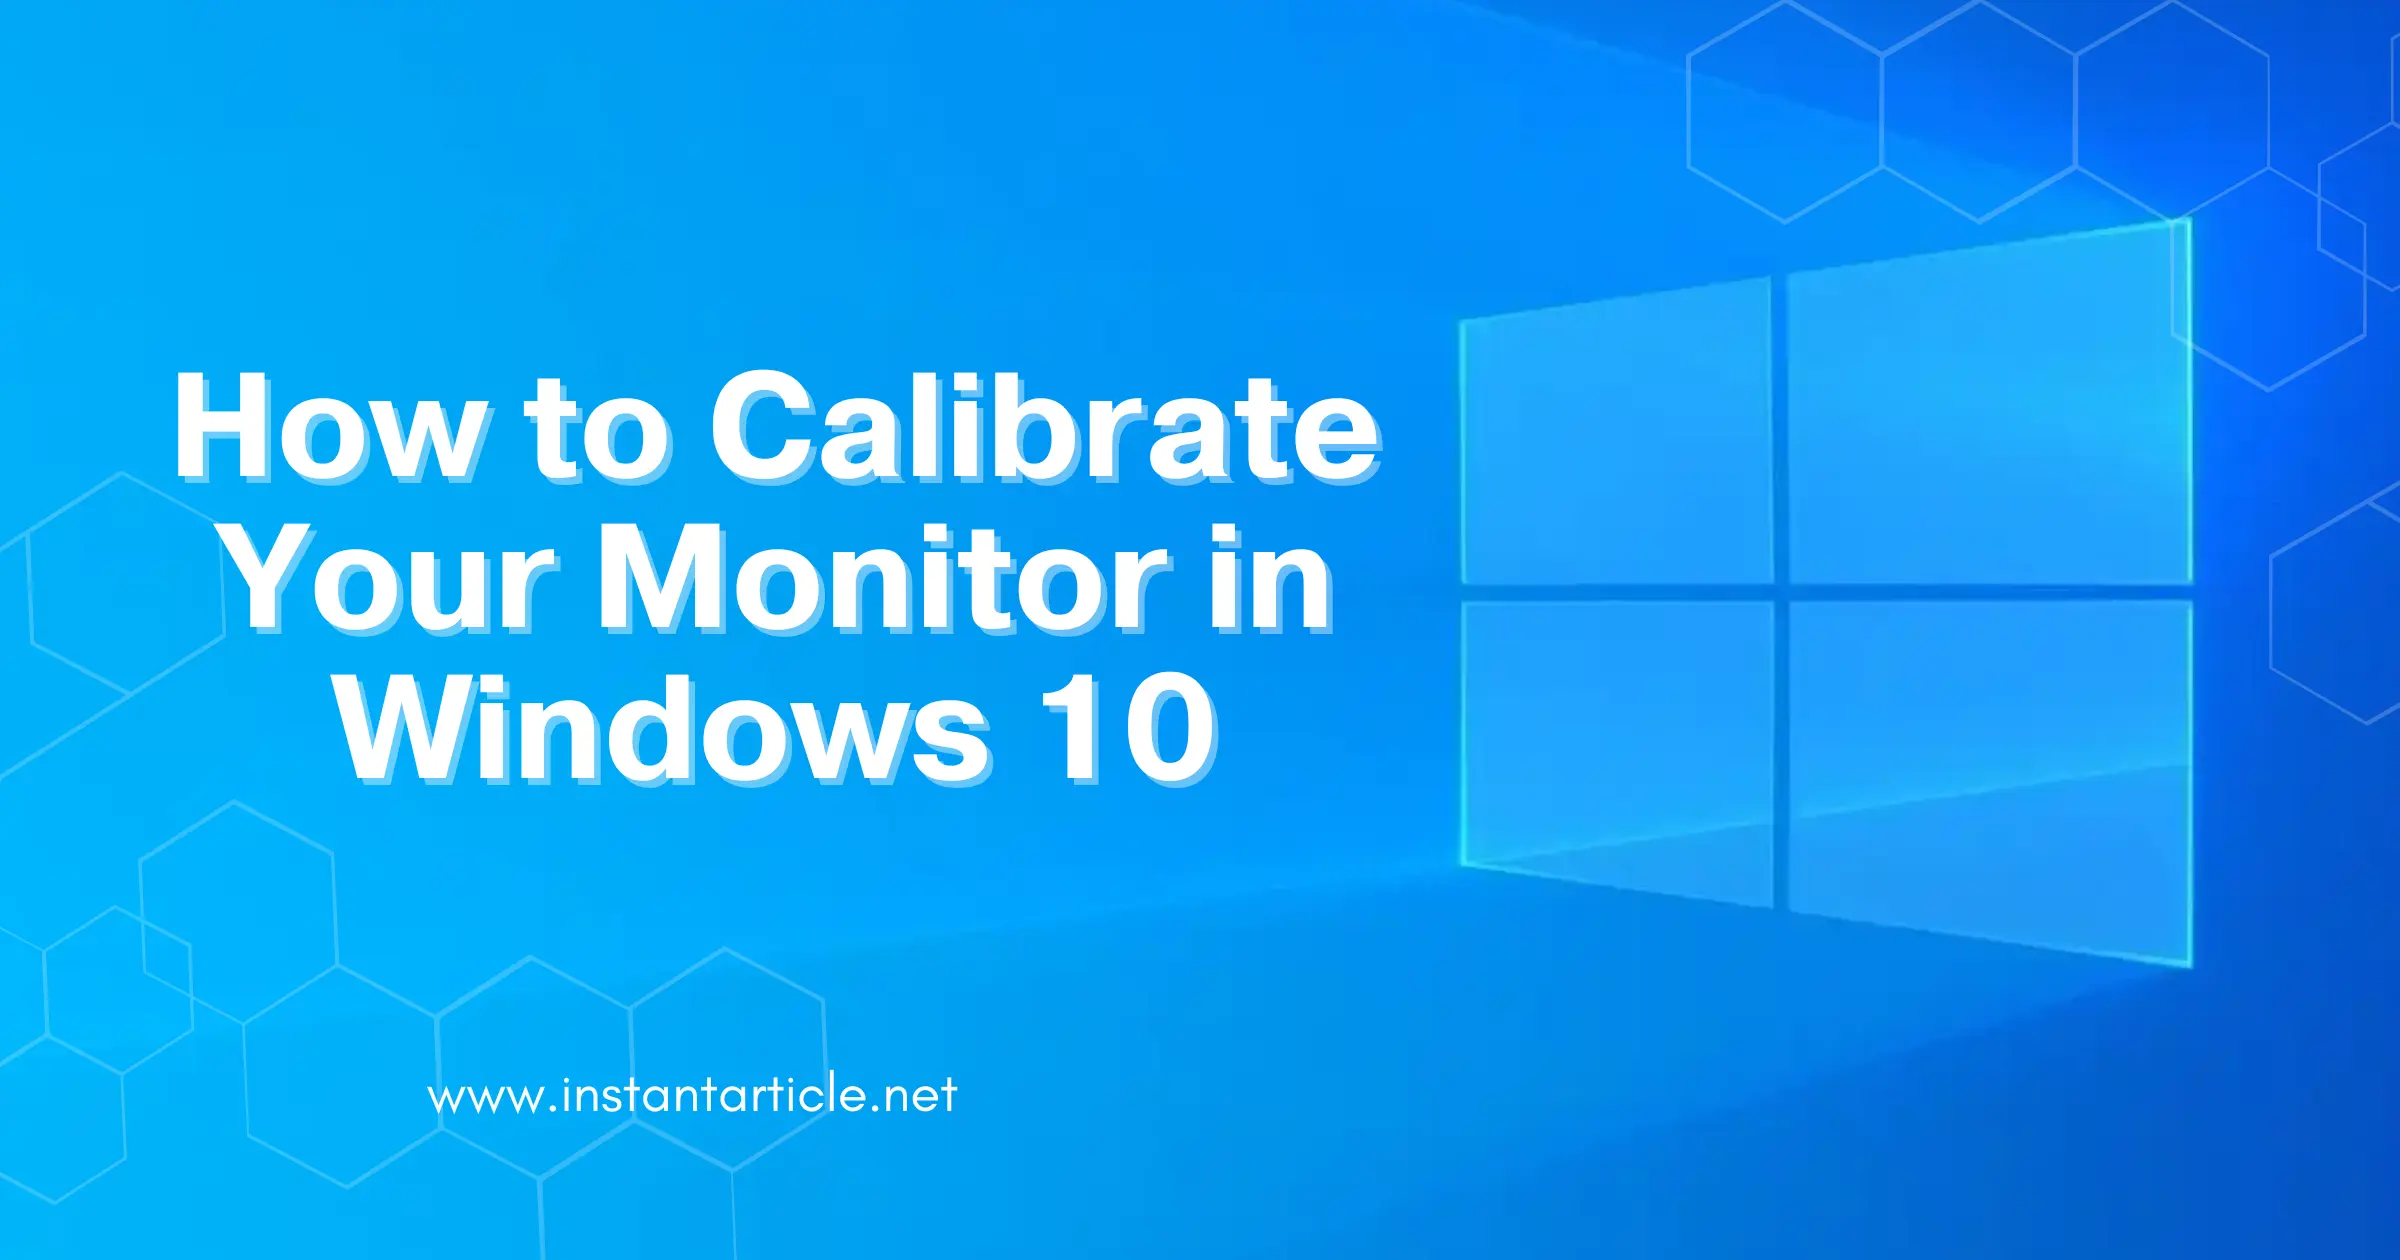 Windows 10 logo with the text "How to Calibrate Your Monitor in Windows 10" and the URL instantarticle.net